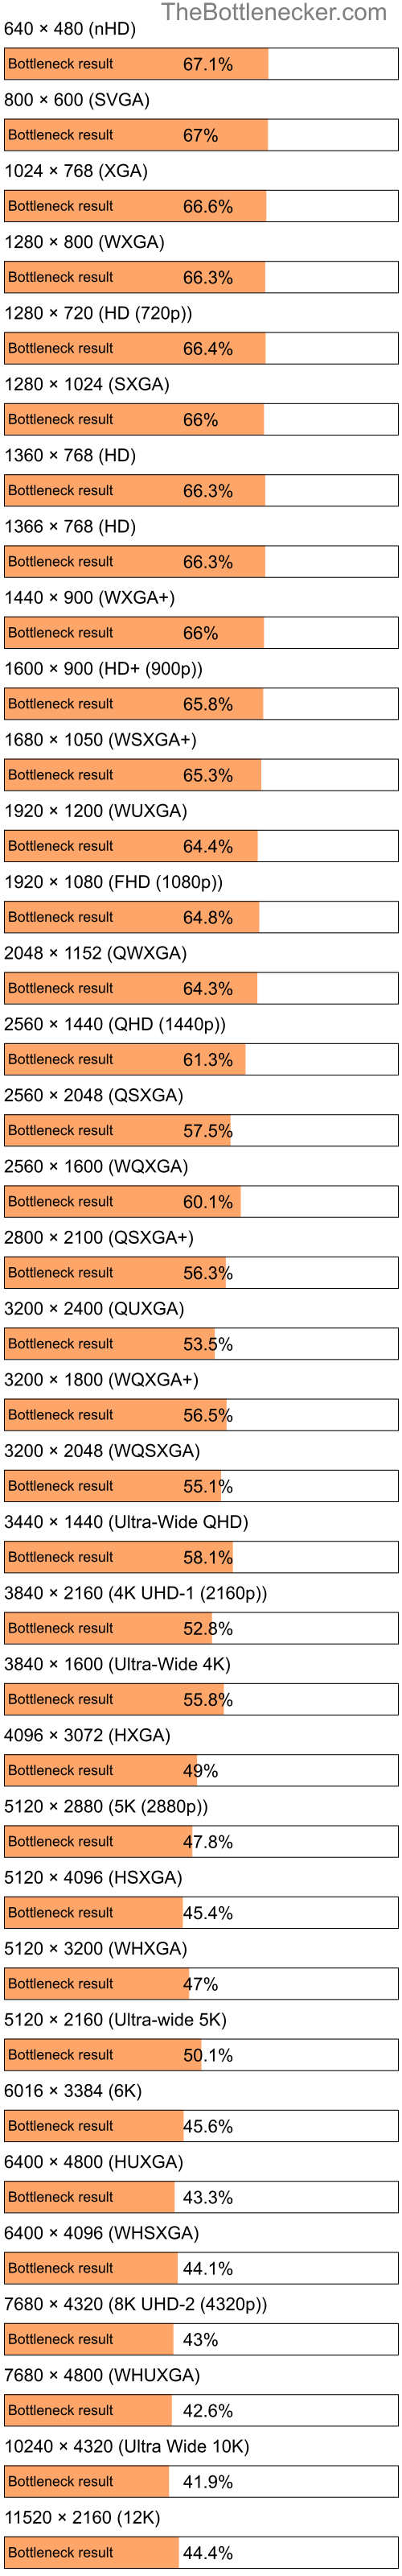 Bottleneck results by resolution for AMD Ryzen 3 3200G and NVIDIA GeForce RTX 4090 in General Tasks